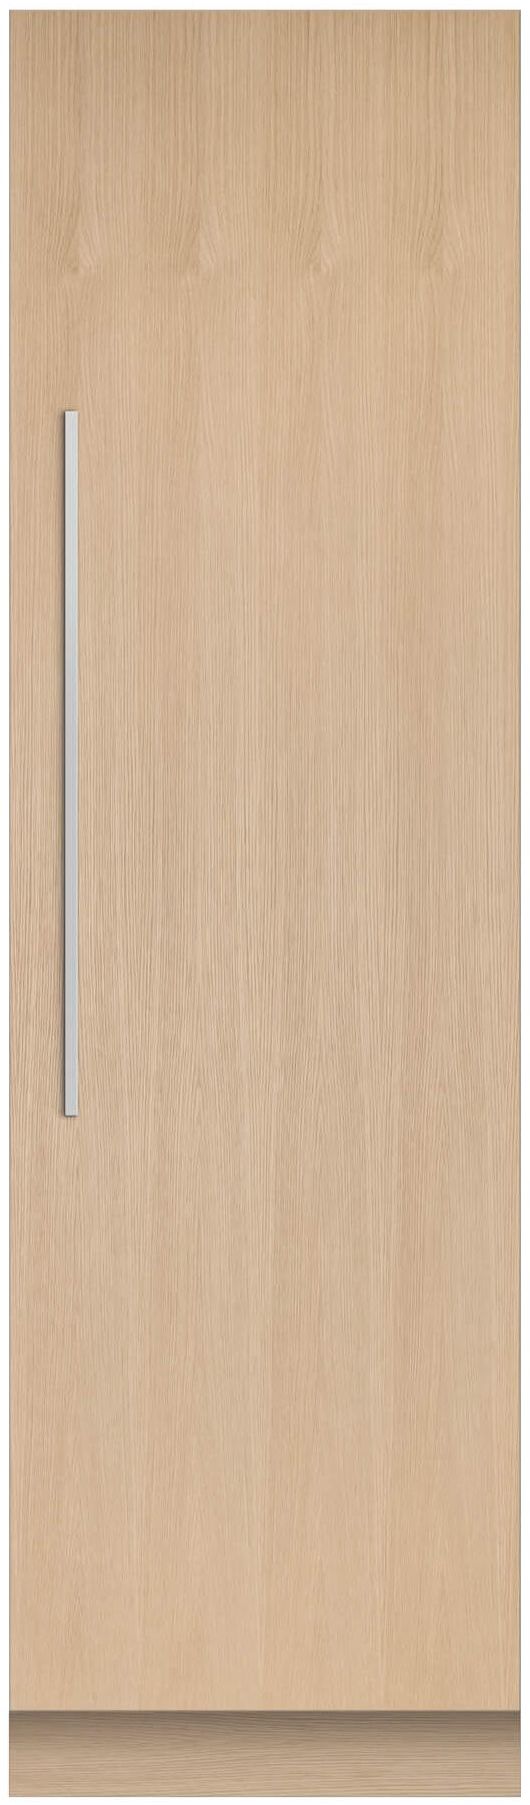 Fisher & Paykel 12.4 Cu. Ft. Panel Ready Column Refrigerator